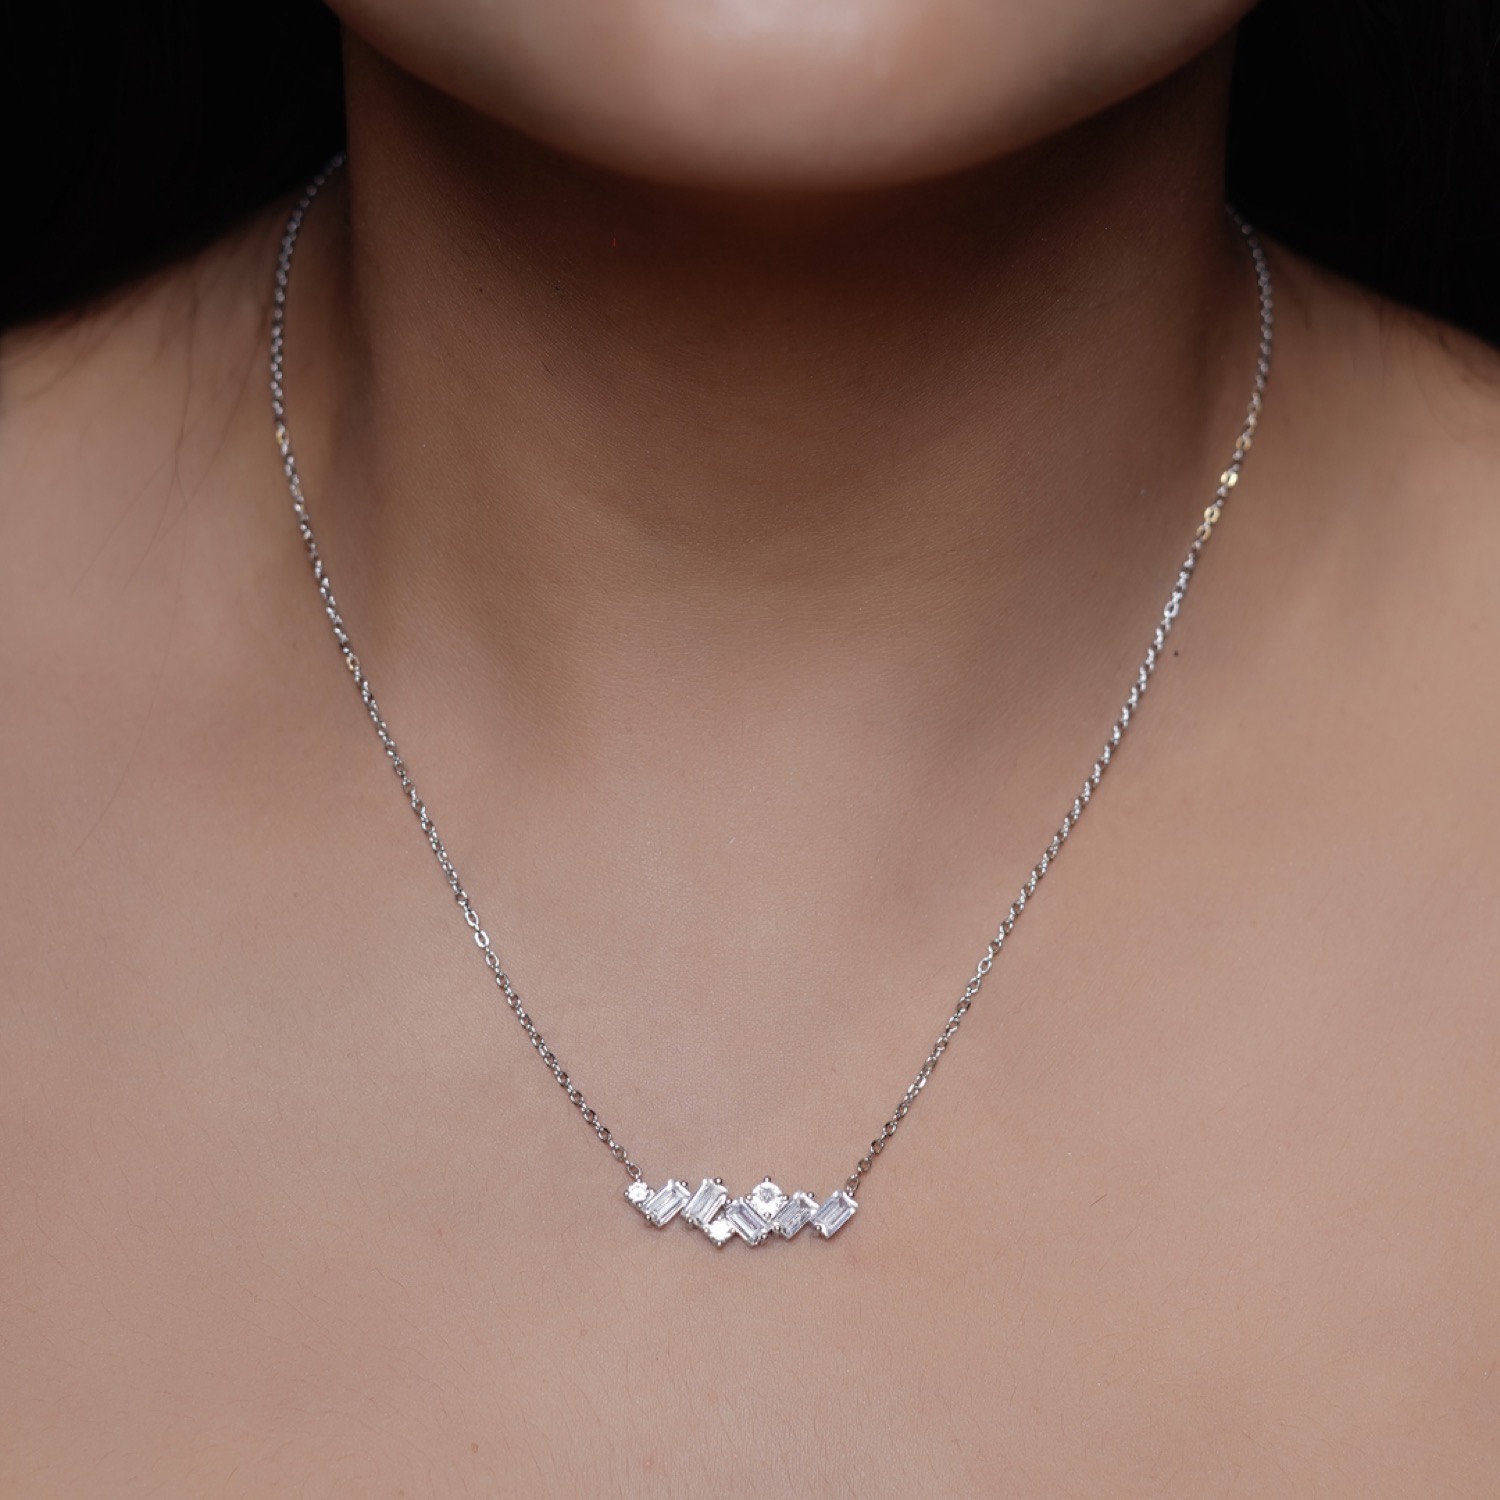 varam_chain_102022_baugette_and_round_cut_white_stone_bar_pendant_with_silver_chain-2